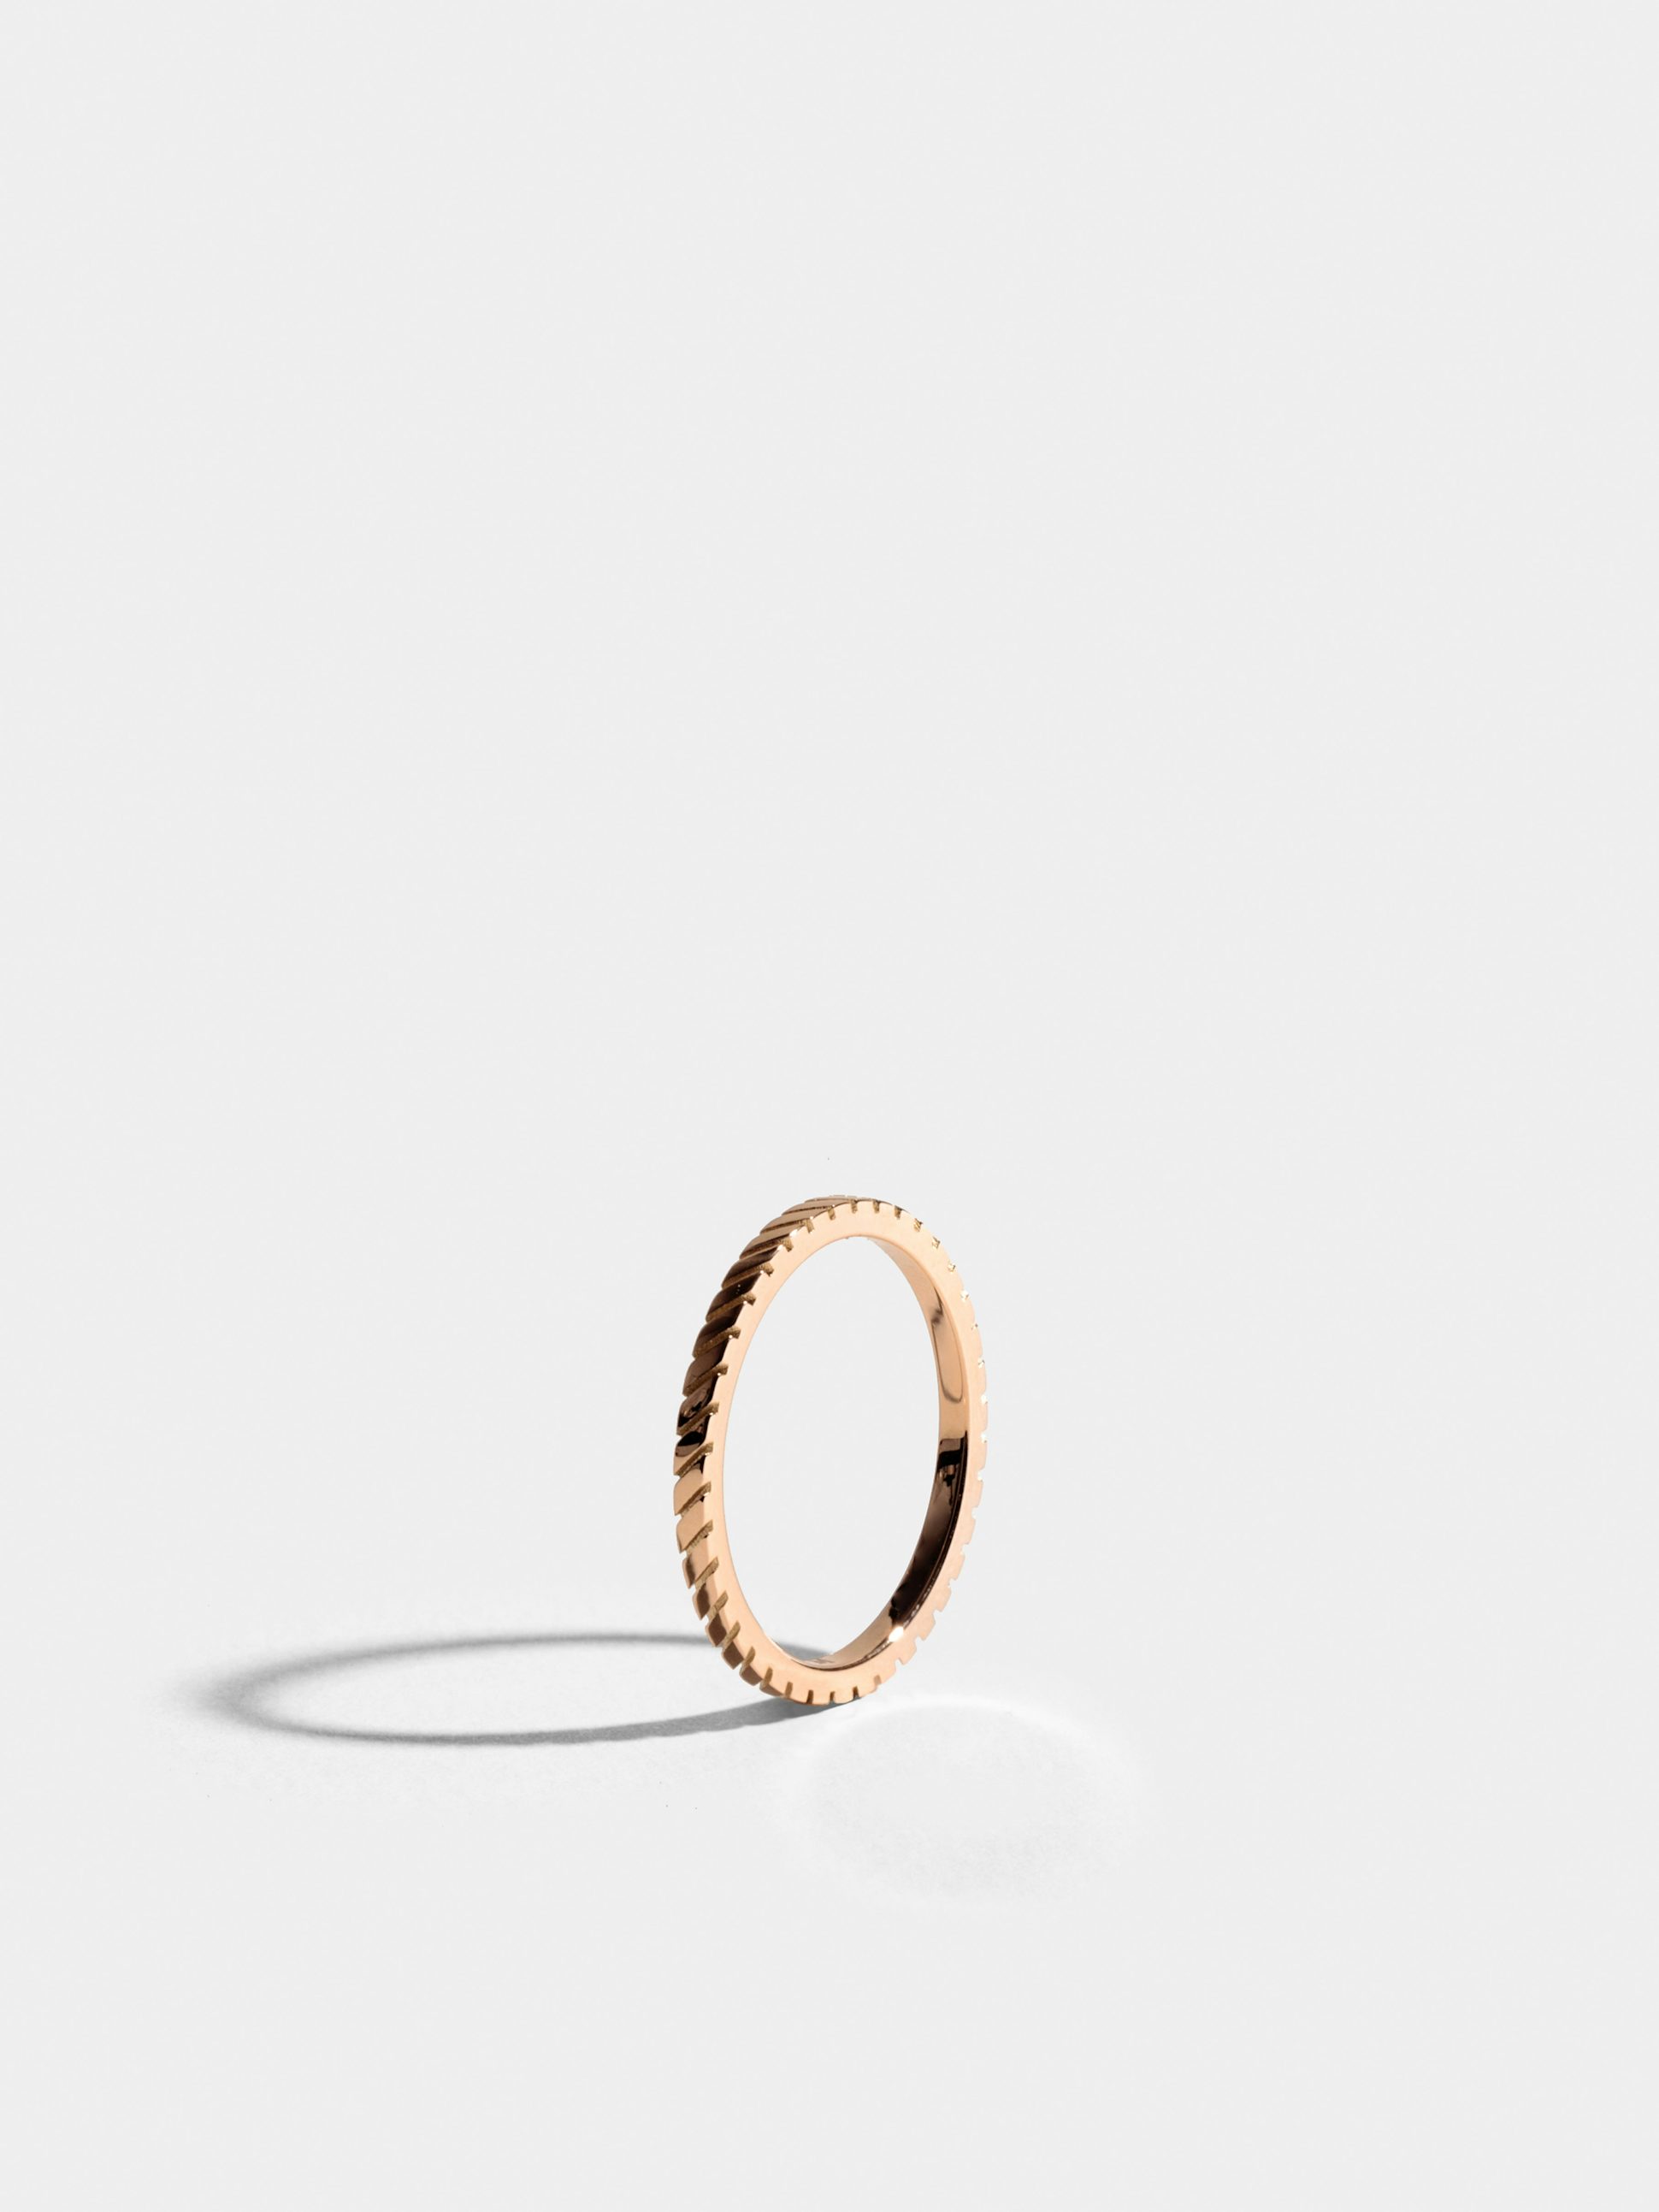 Anagramme grooved ring in 18k Fairmined ethical rose gold